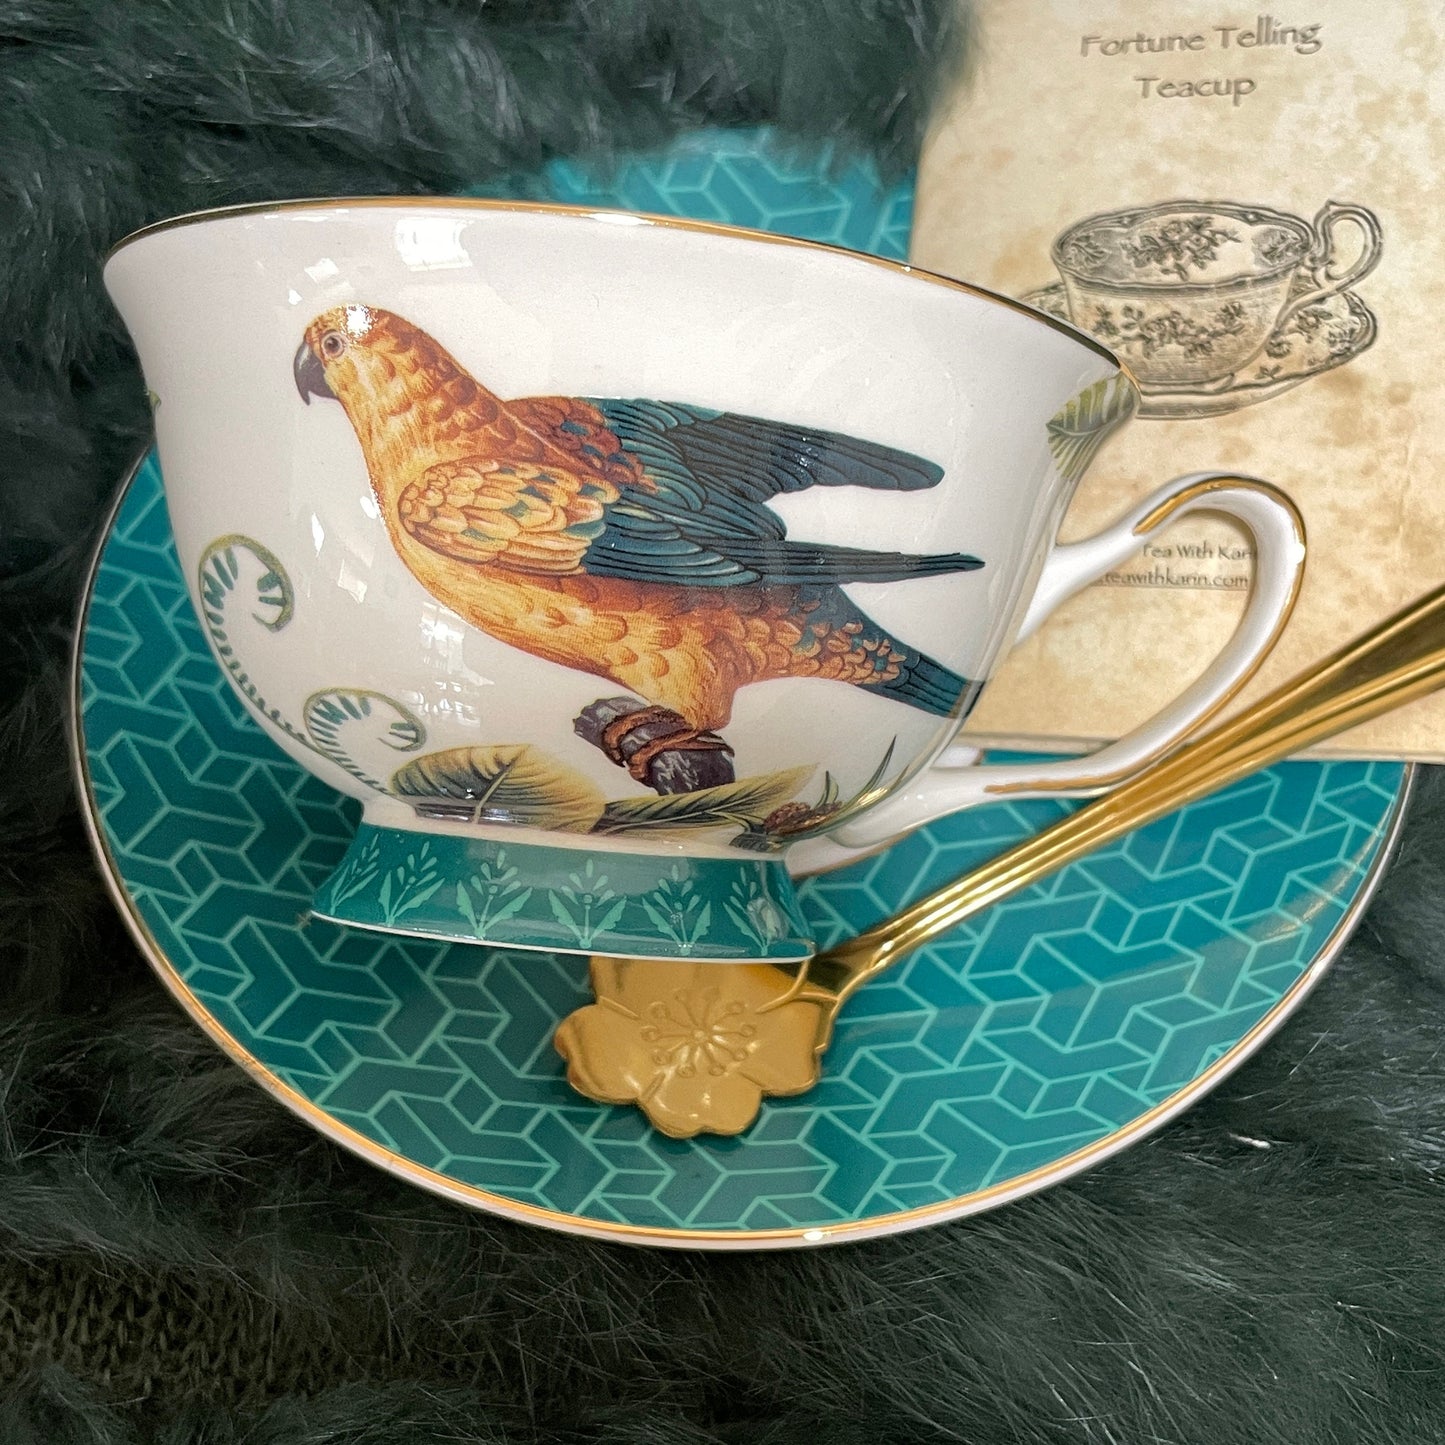 Fortune teller teacup in aqua blue colour with a pheasant pictured on the teacup. Fortuneteller tea cup are easy to use so make your tea and drink it and you read the images where the tea lands from the booklet provided. Free gift of gold teaspoon.